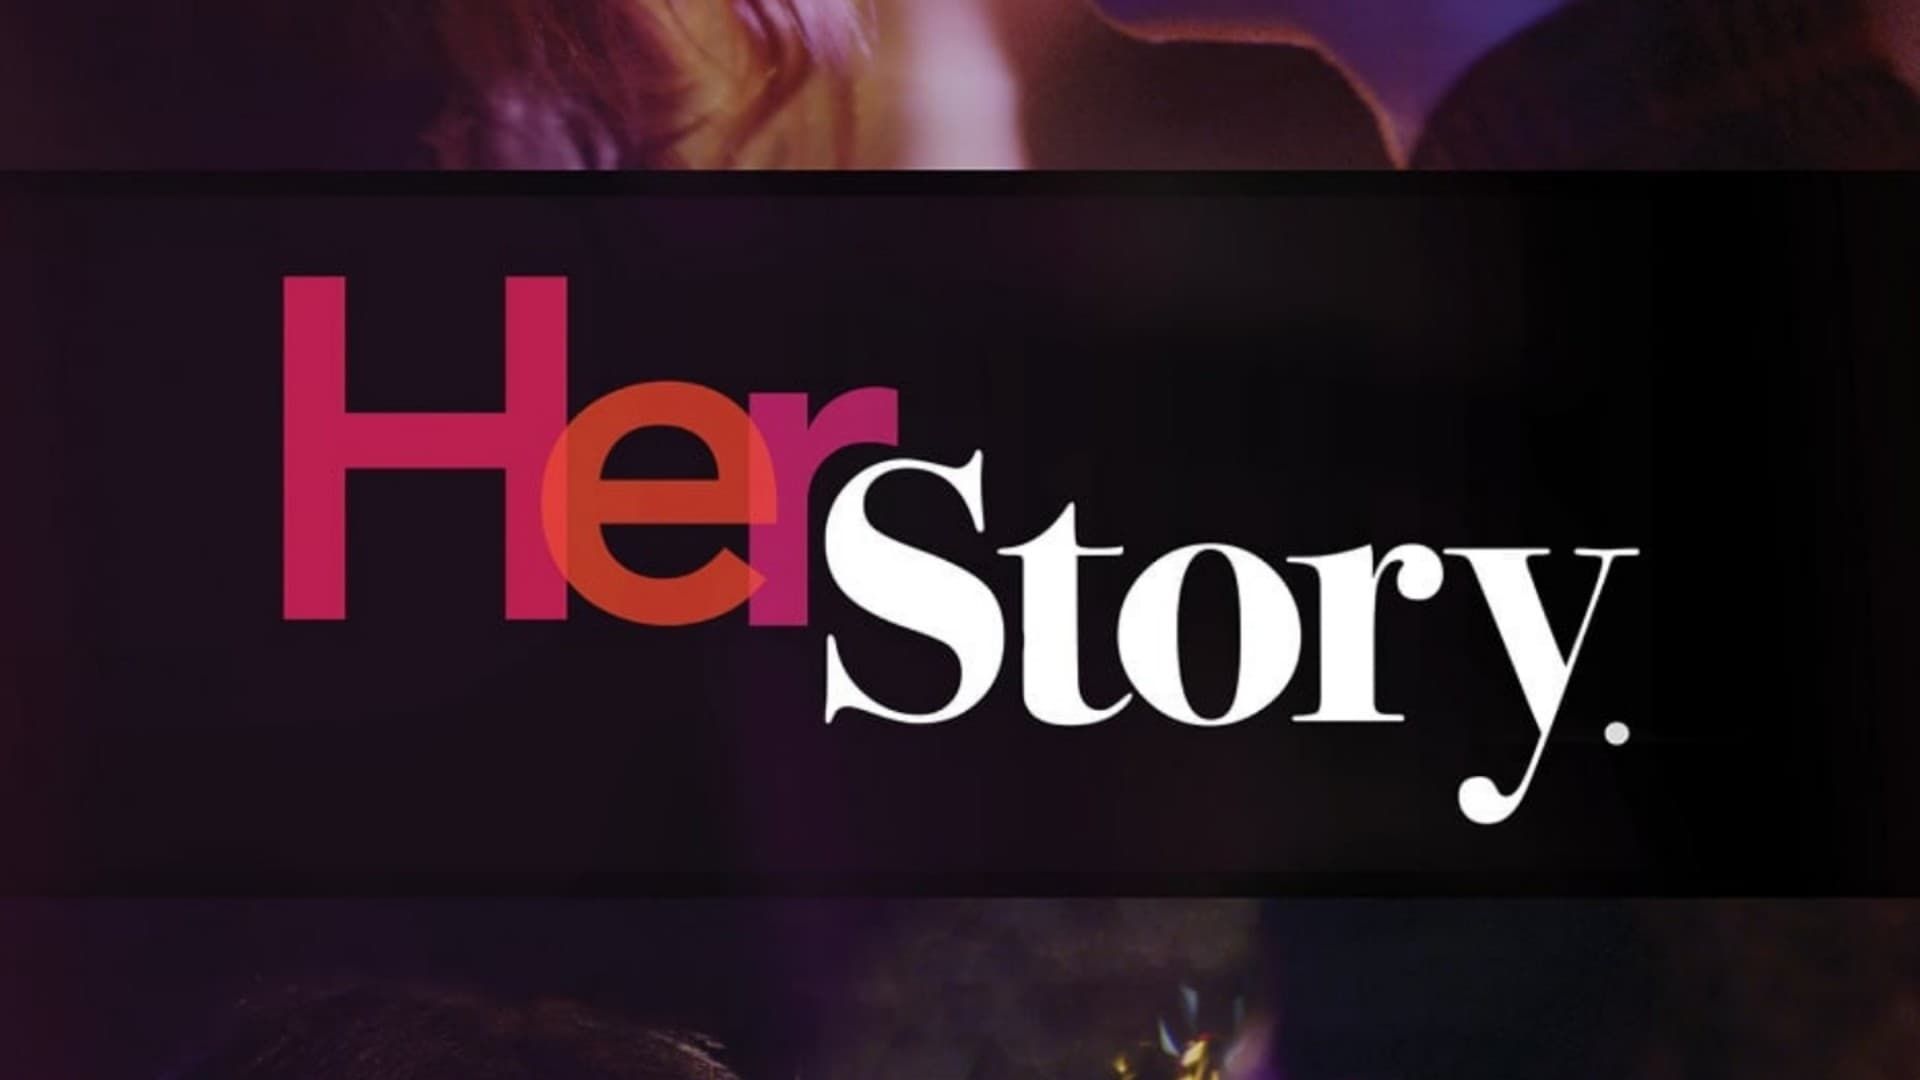 Her Story background